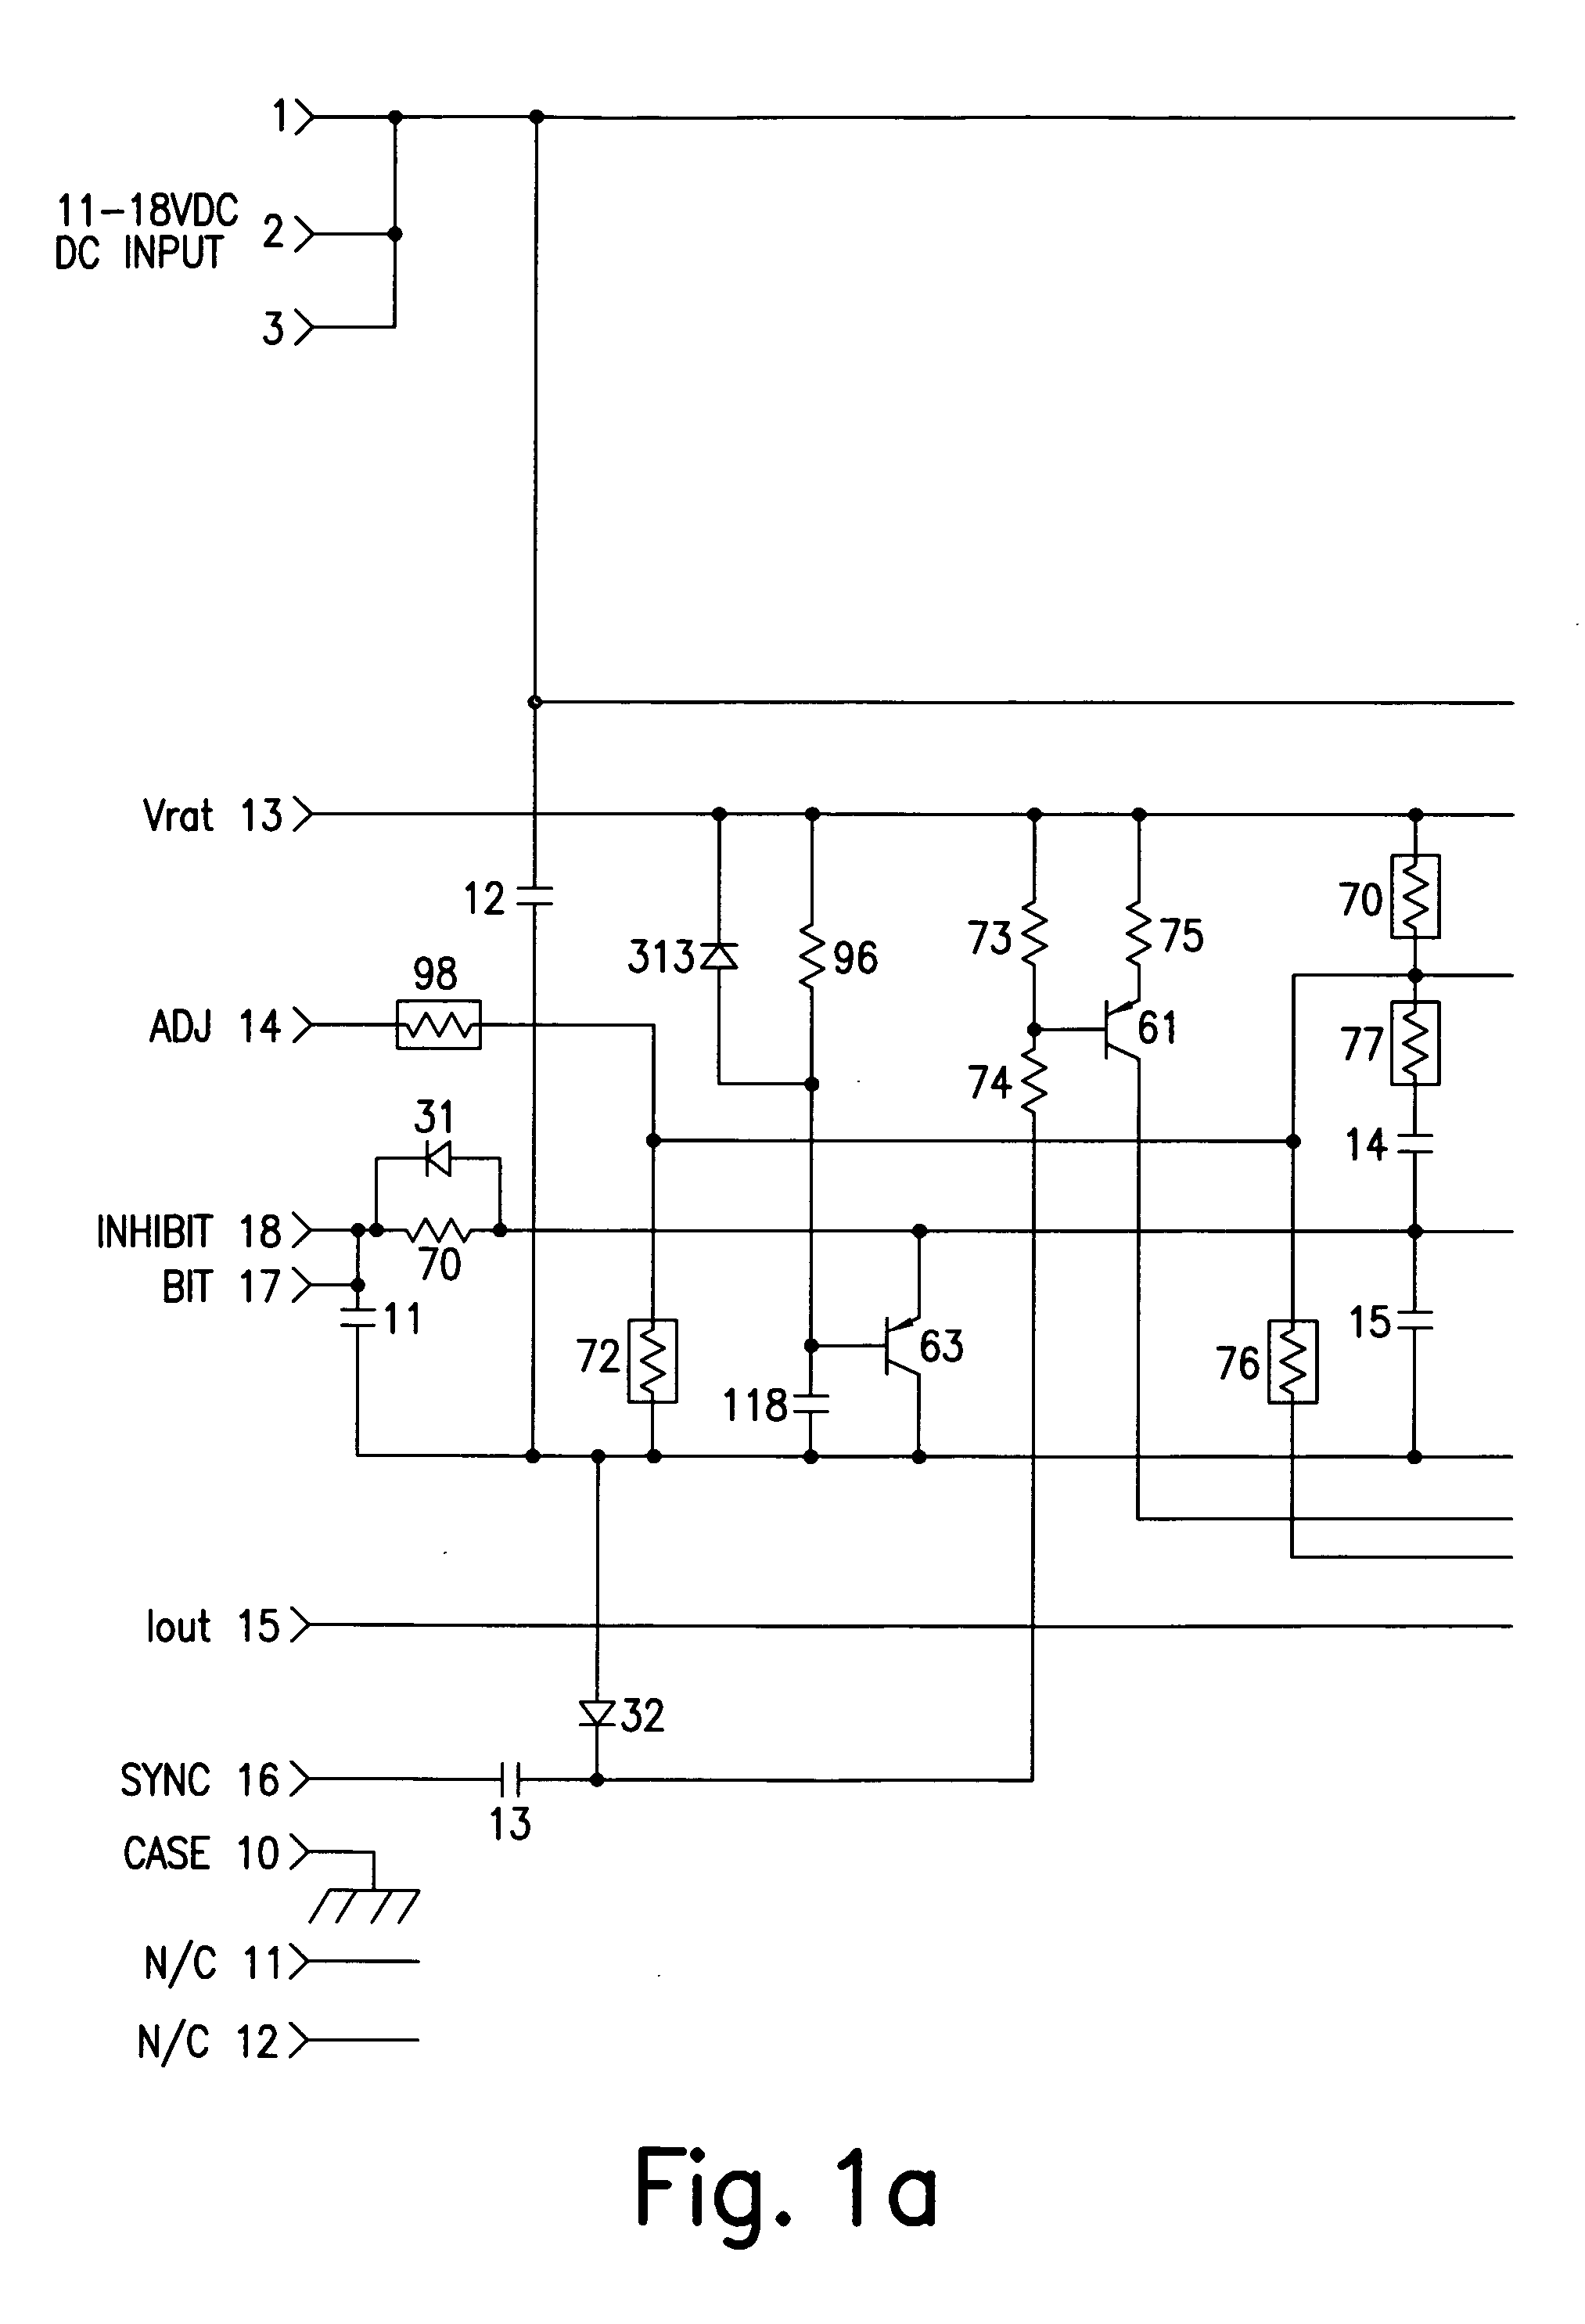 Method for implementing radiation hardened, power efficient, non isolated low output voltage DC/DC converters with non-radiation hardened components